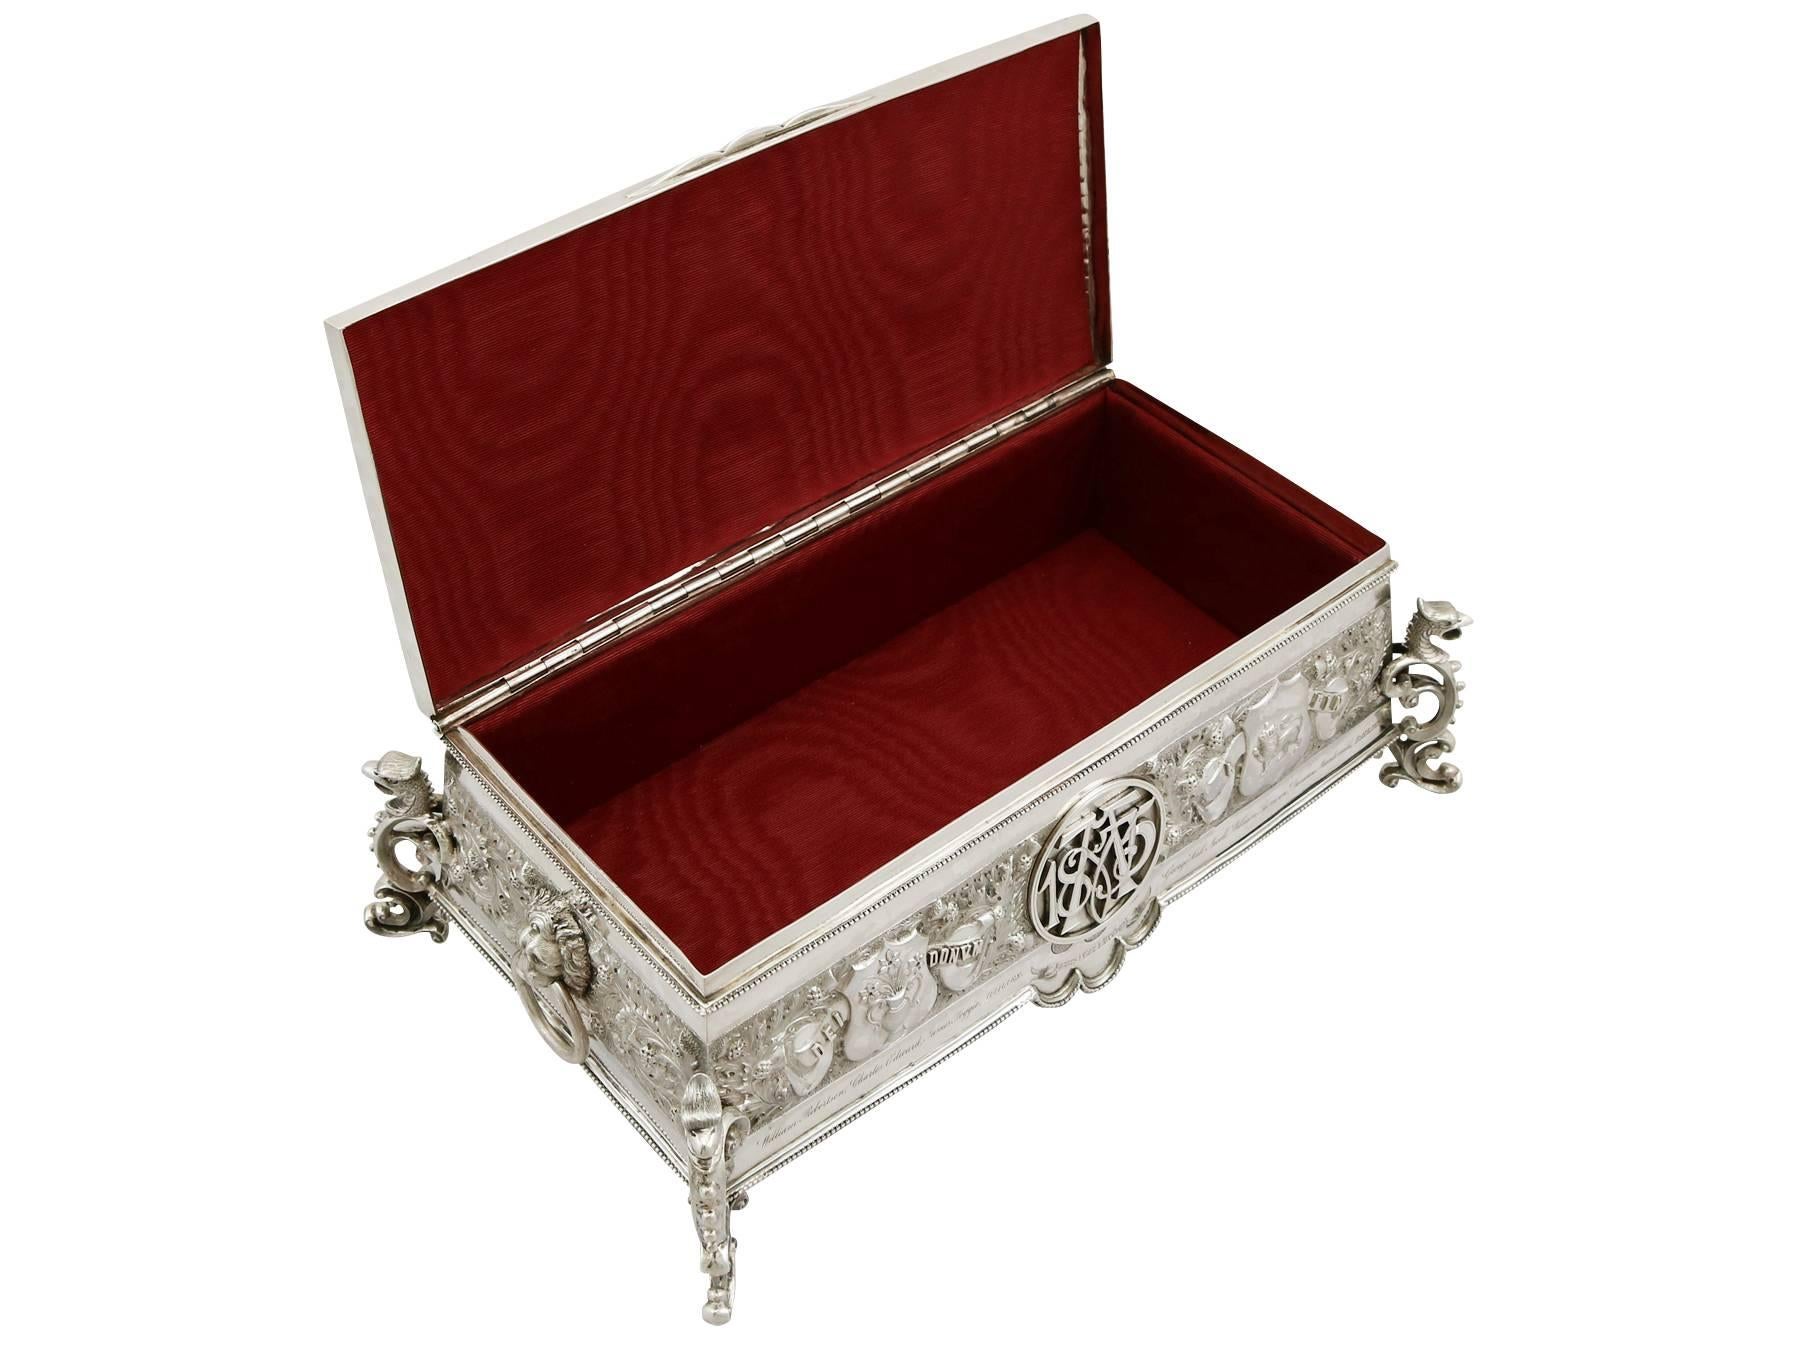 Late 19th Century Antique Scottish Sterling Silver Freedom Casket, Victorian